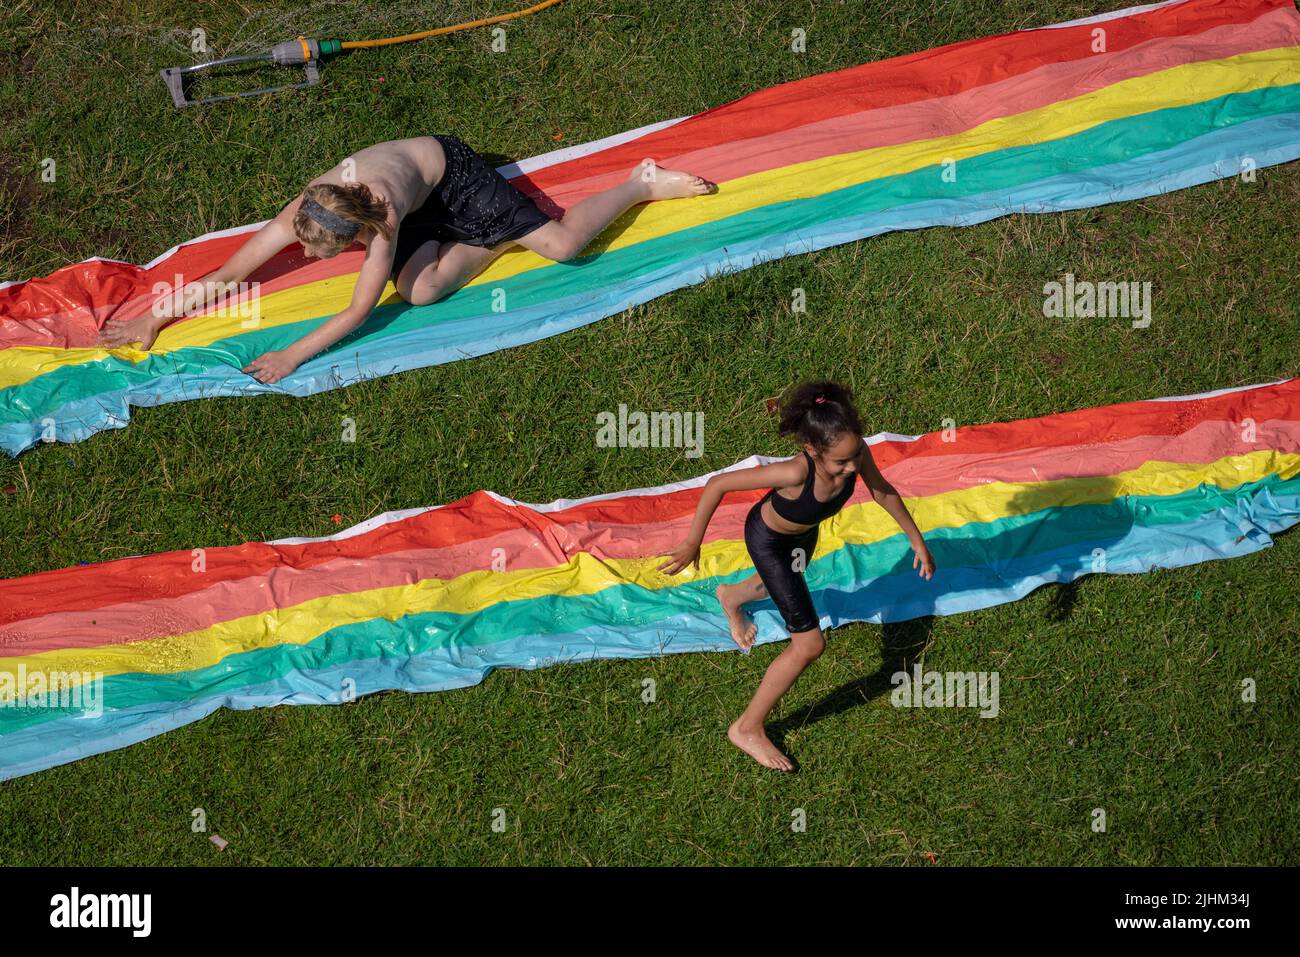 London, UK. 19th July, 2022. UK Weather: City Heatwave. Locals in east London cool off with water slides as heatwave temperatures finally exceed 40C on Tuesday afternoon. Credit: Guy Corbishley/Alamy Live News Stock Photo